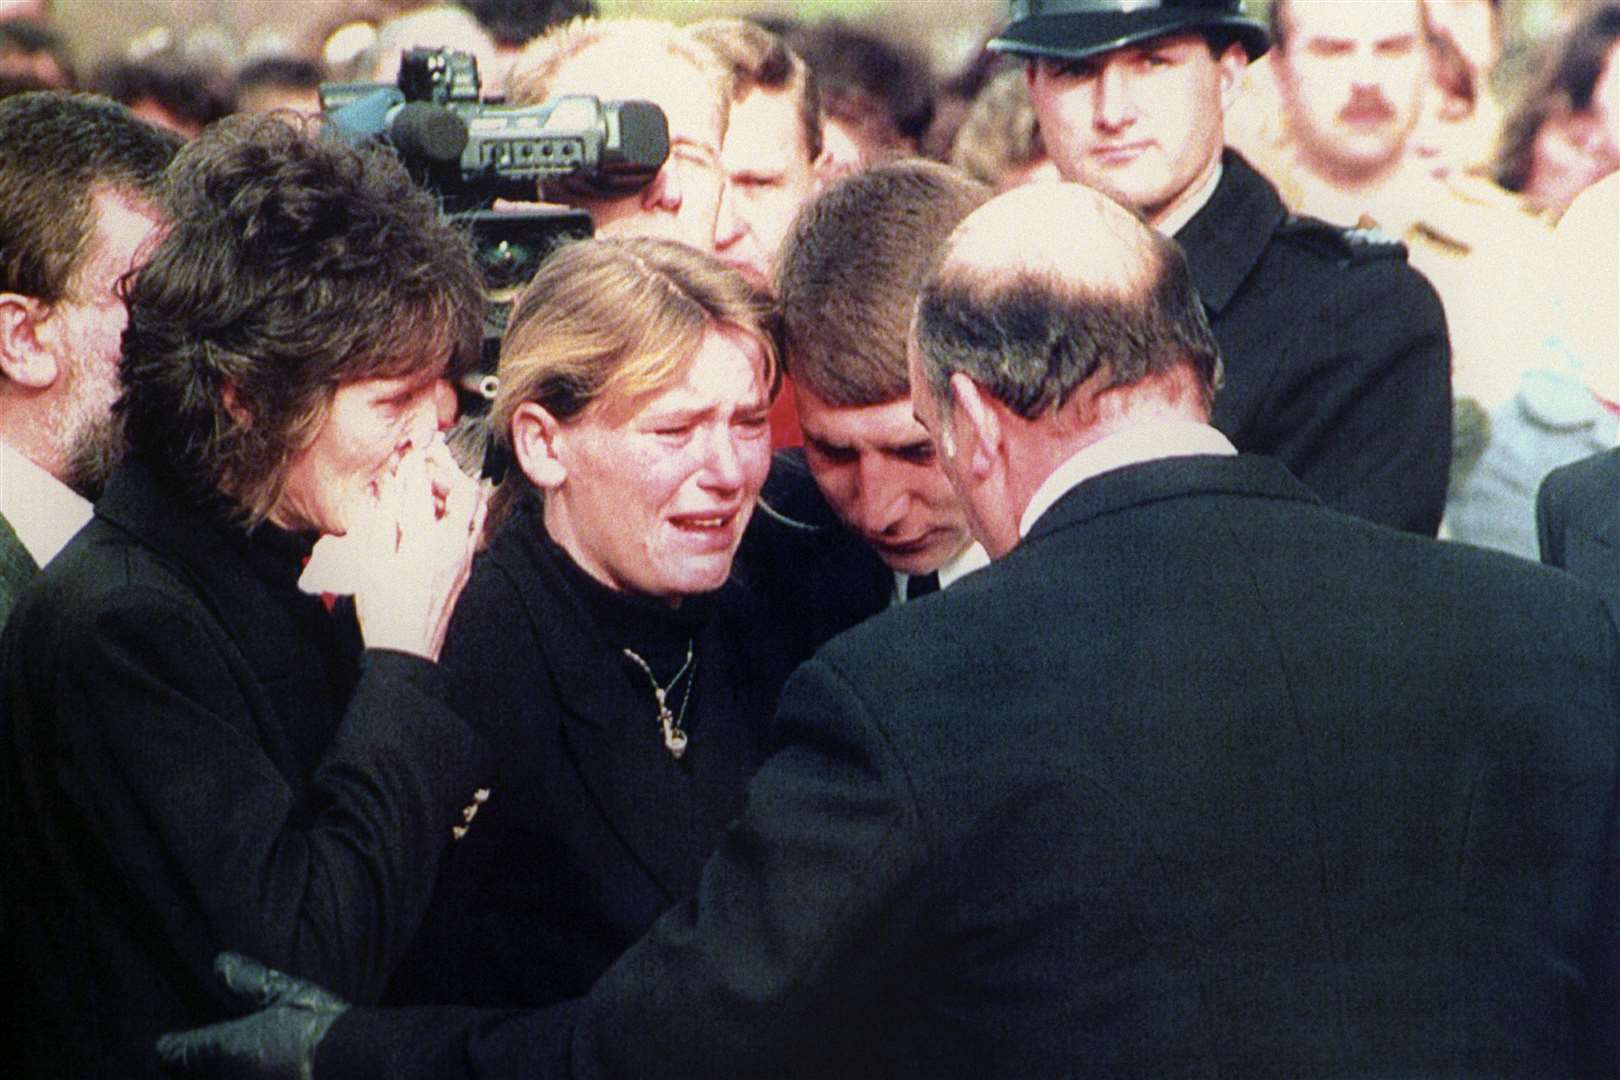 Nikki’s mother at the youngster’s funeral in Sunderland (PA)